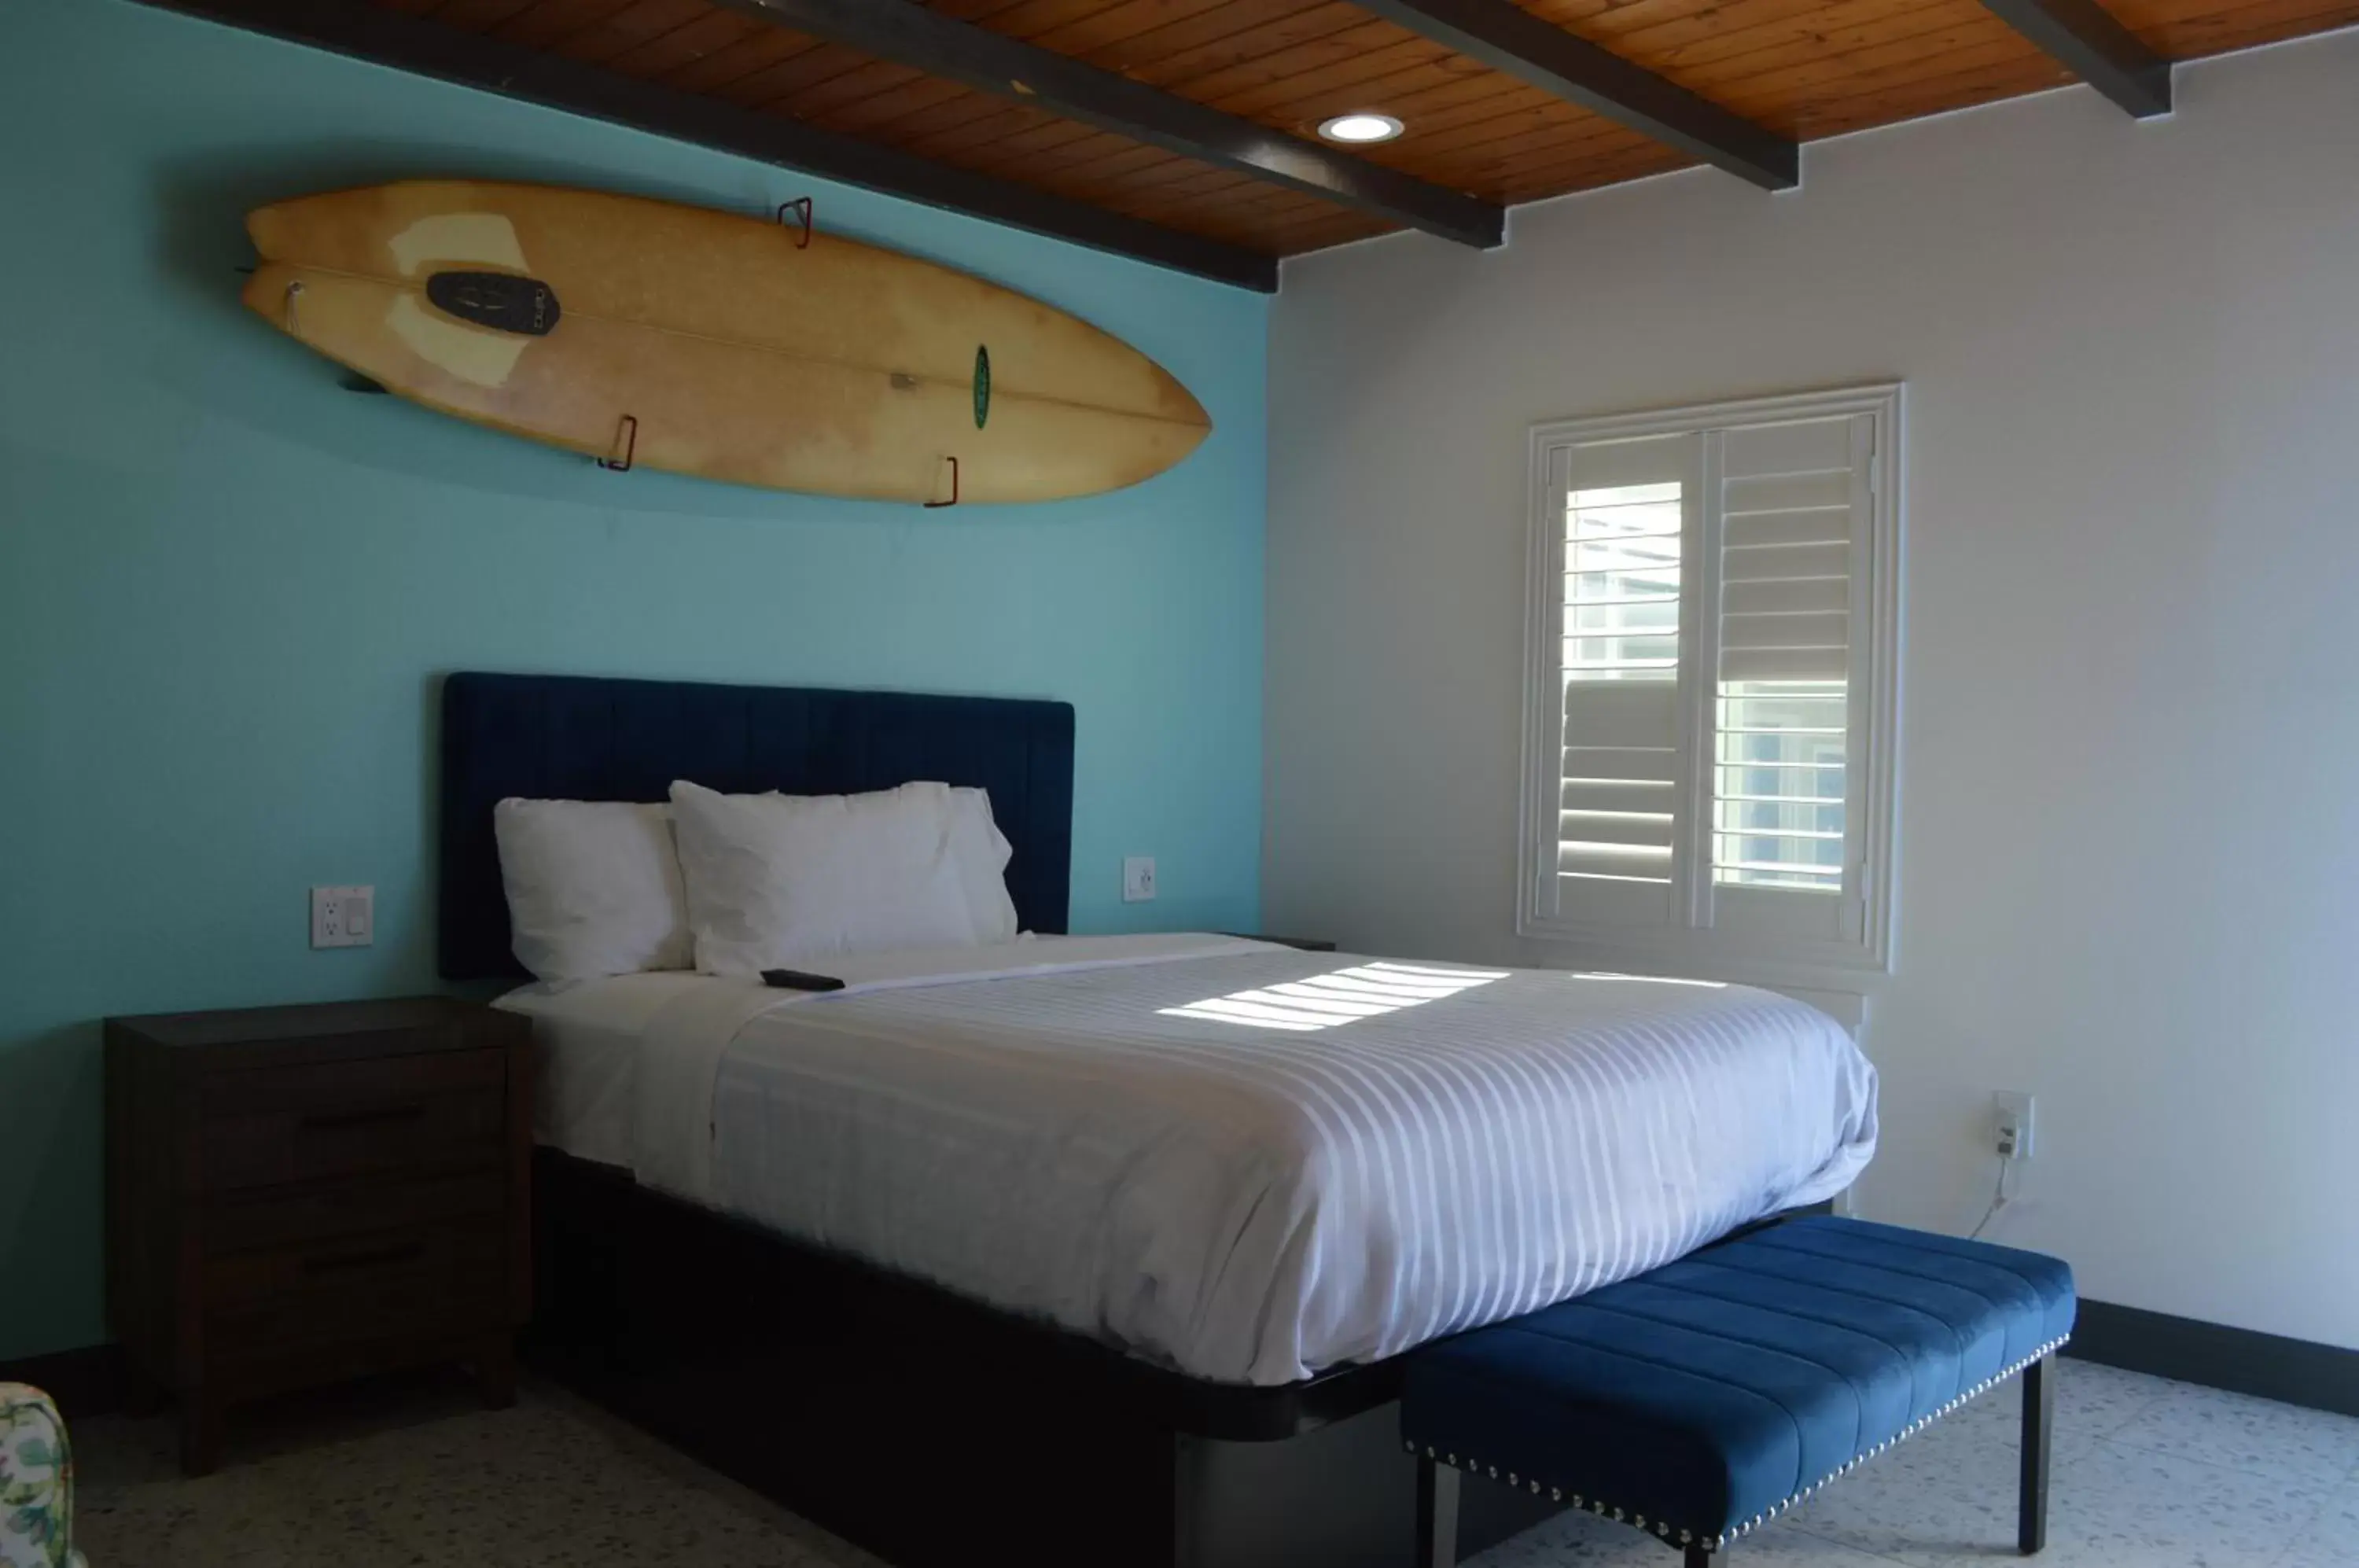 Bed in Calafia Inn San Clemente Newly renovated